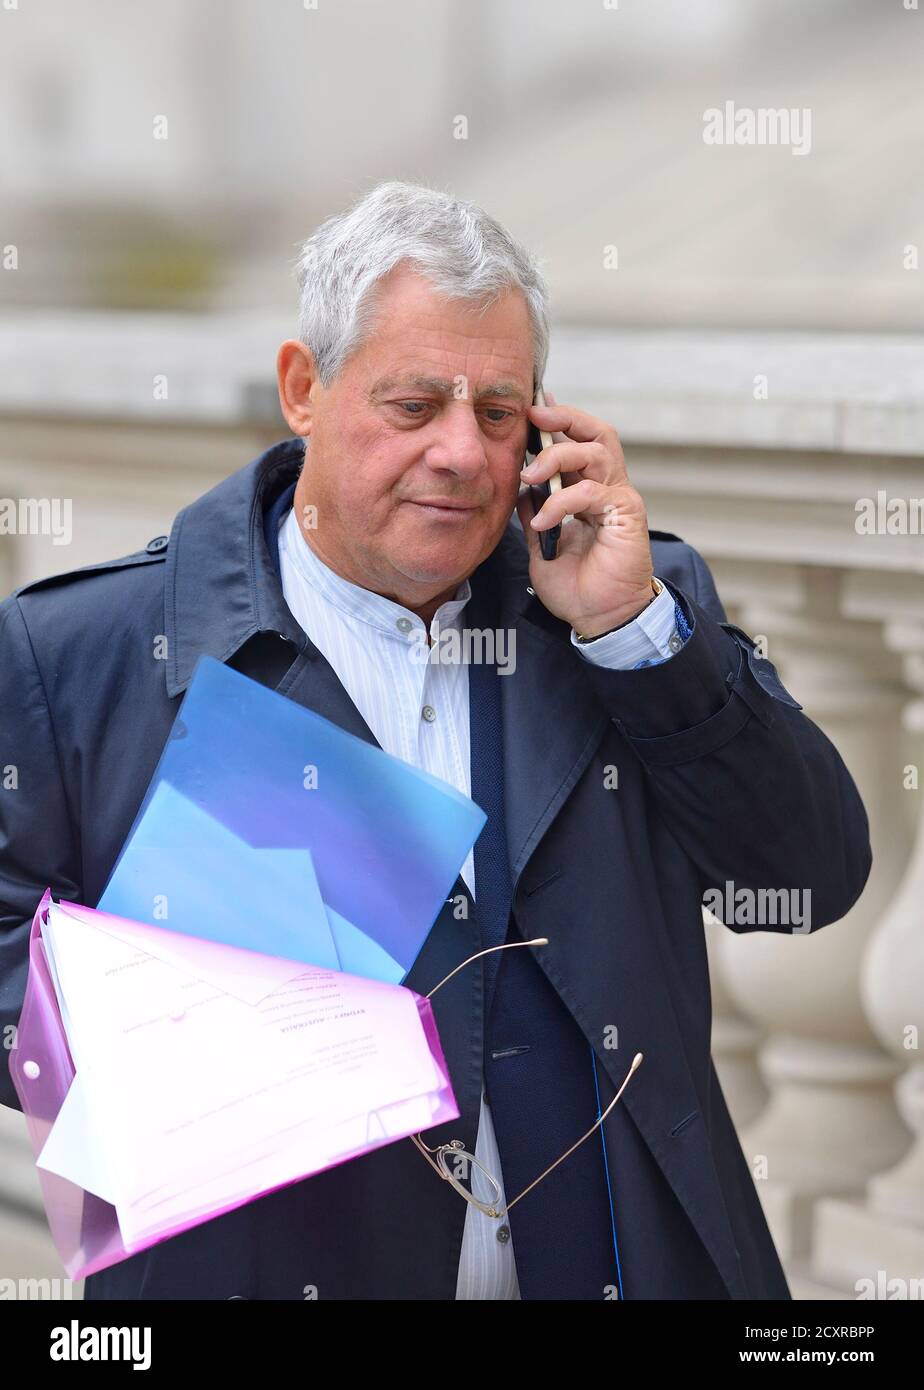 Sir Cameron Mackintosh (theatrical producer and theatre owner) carrying papers about planned 2021 productions, Whitehall, 30th Sept 2020 Stock Photo